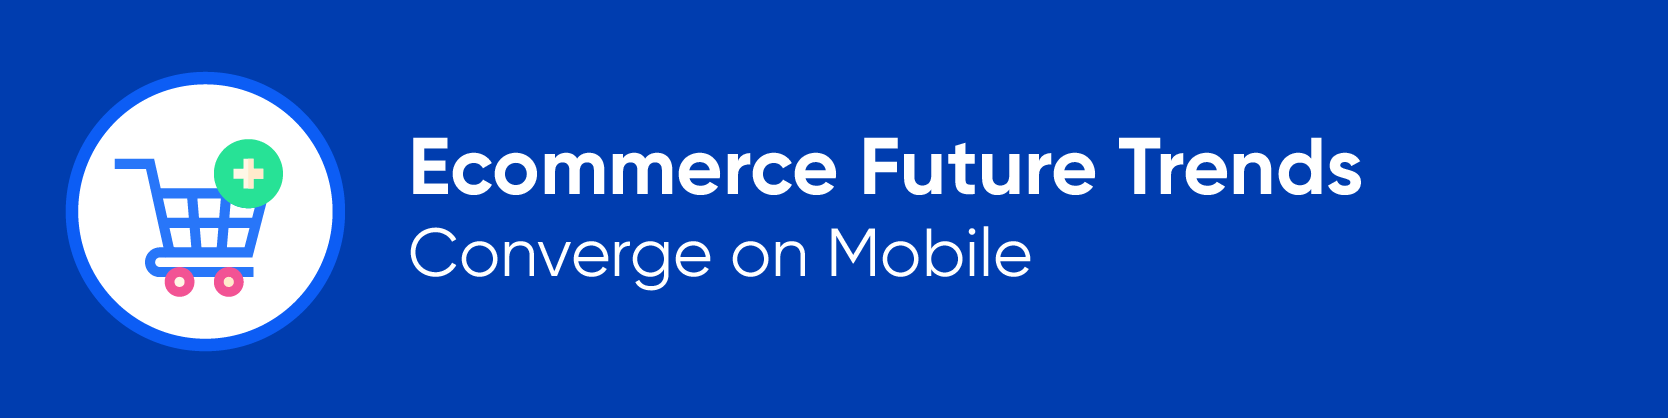 Ecommerce Future Trends Converge on Mobile 